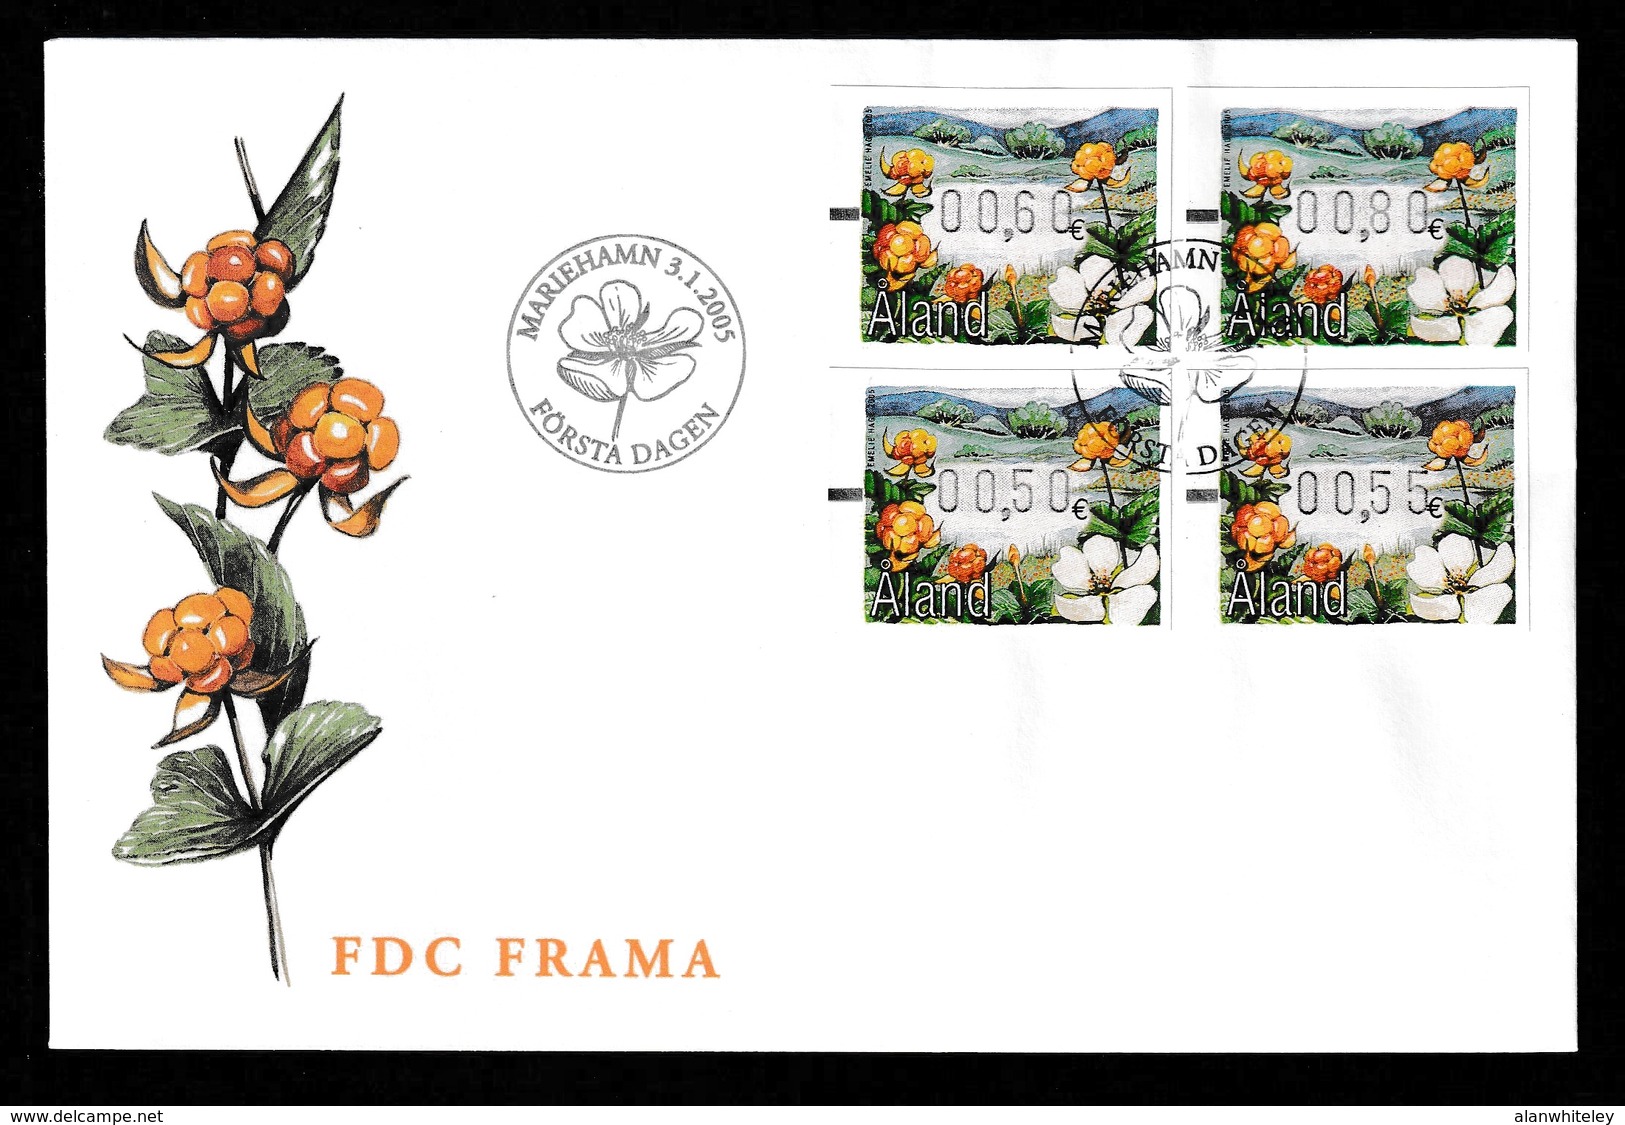 ÅLAND 2003 2004 2005 FRAMA Berries: Set Of 3 First Day Covers CANCELLED - Aland